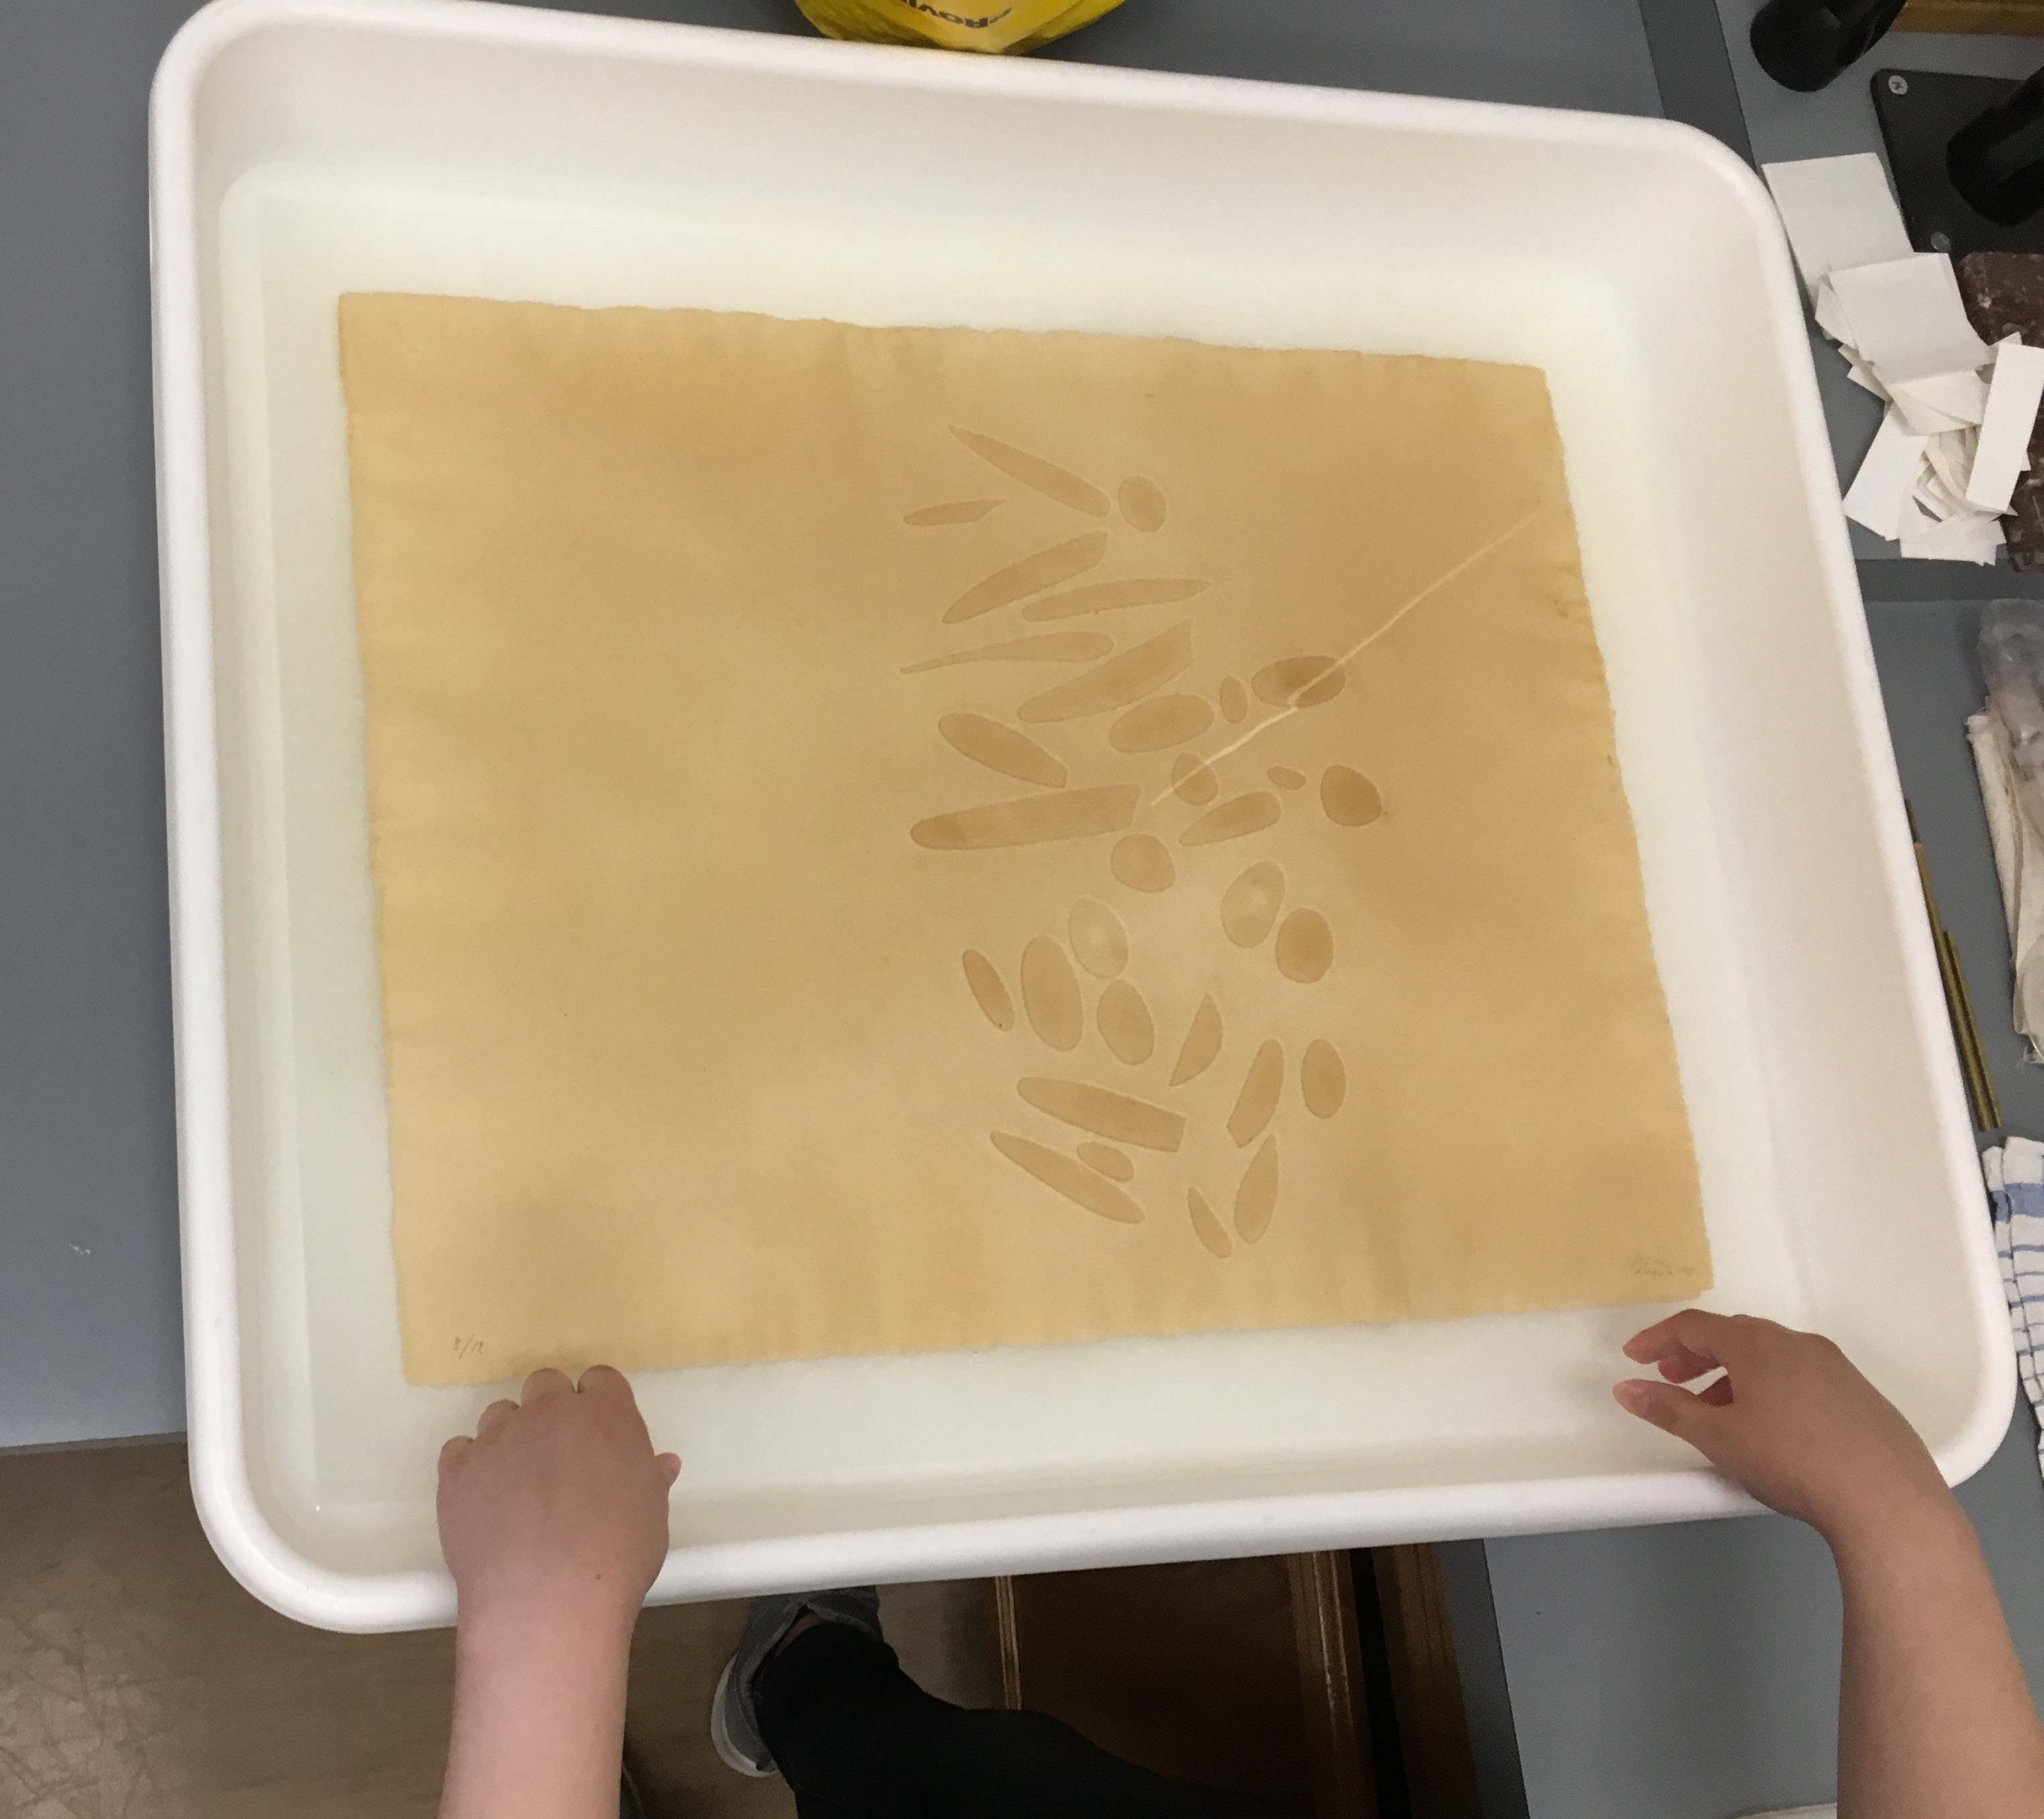 print in a tub of water